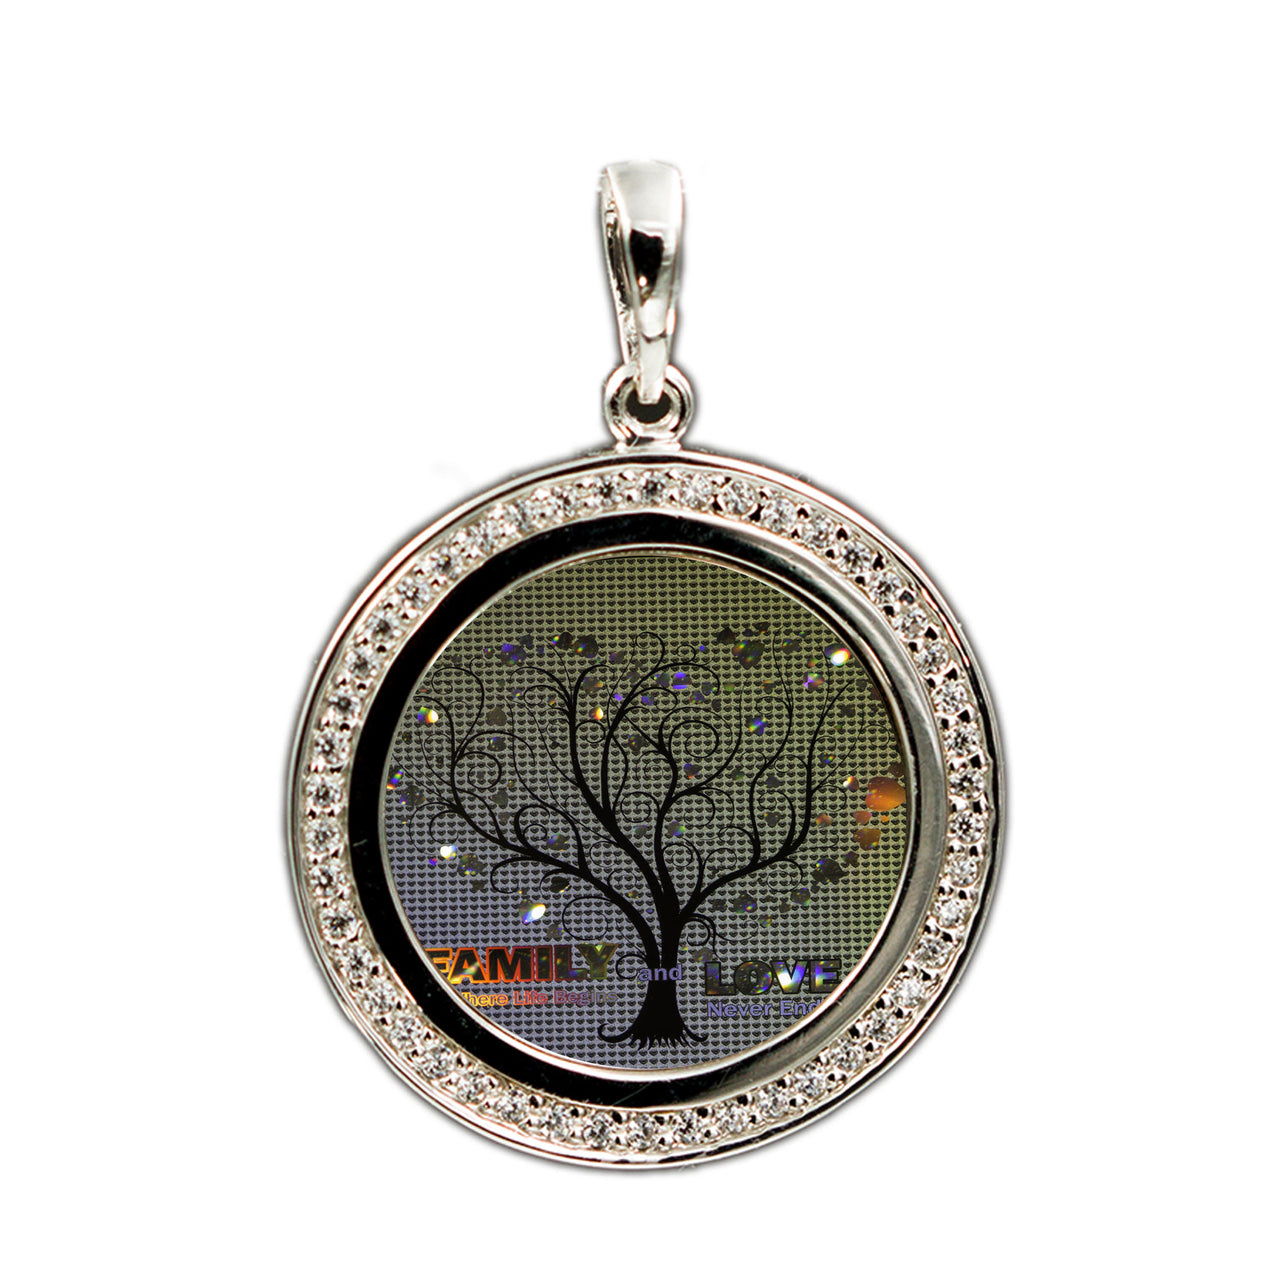 'I love you' Family Tree Pendant embedded crystal